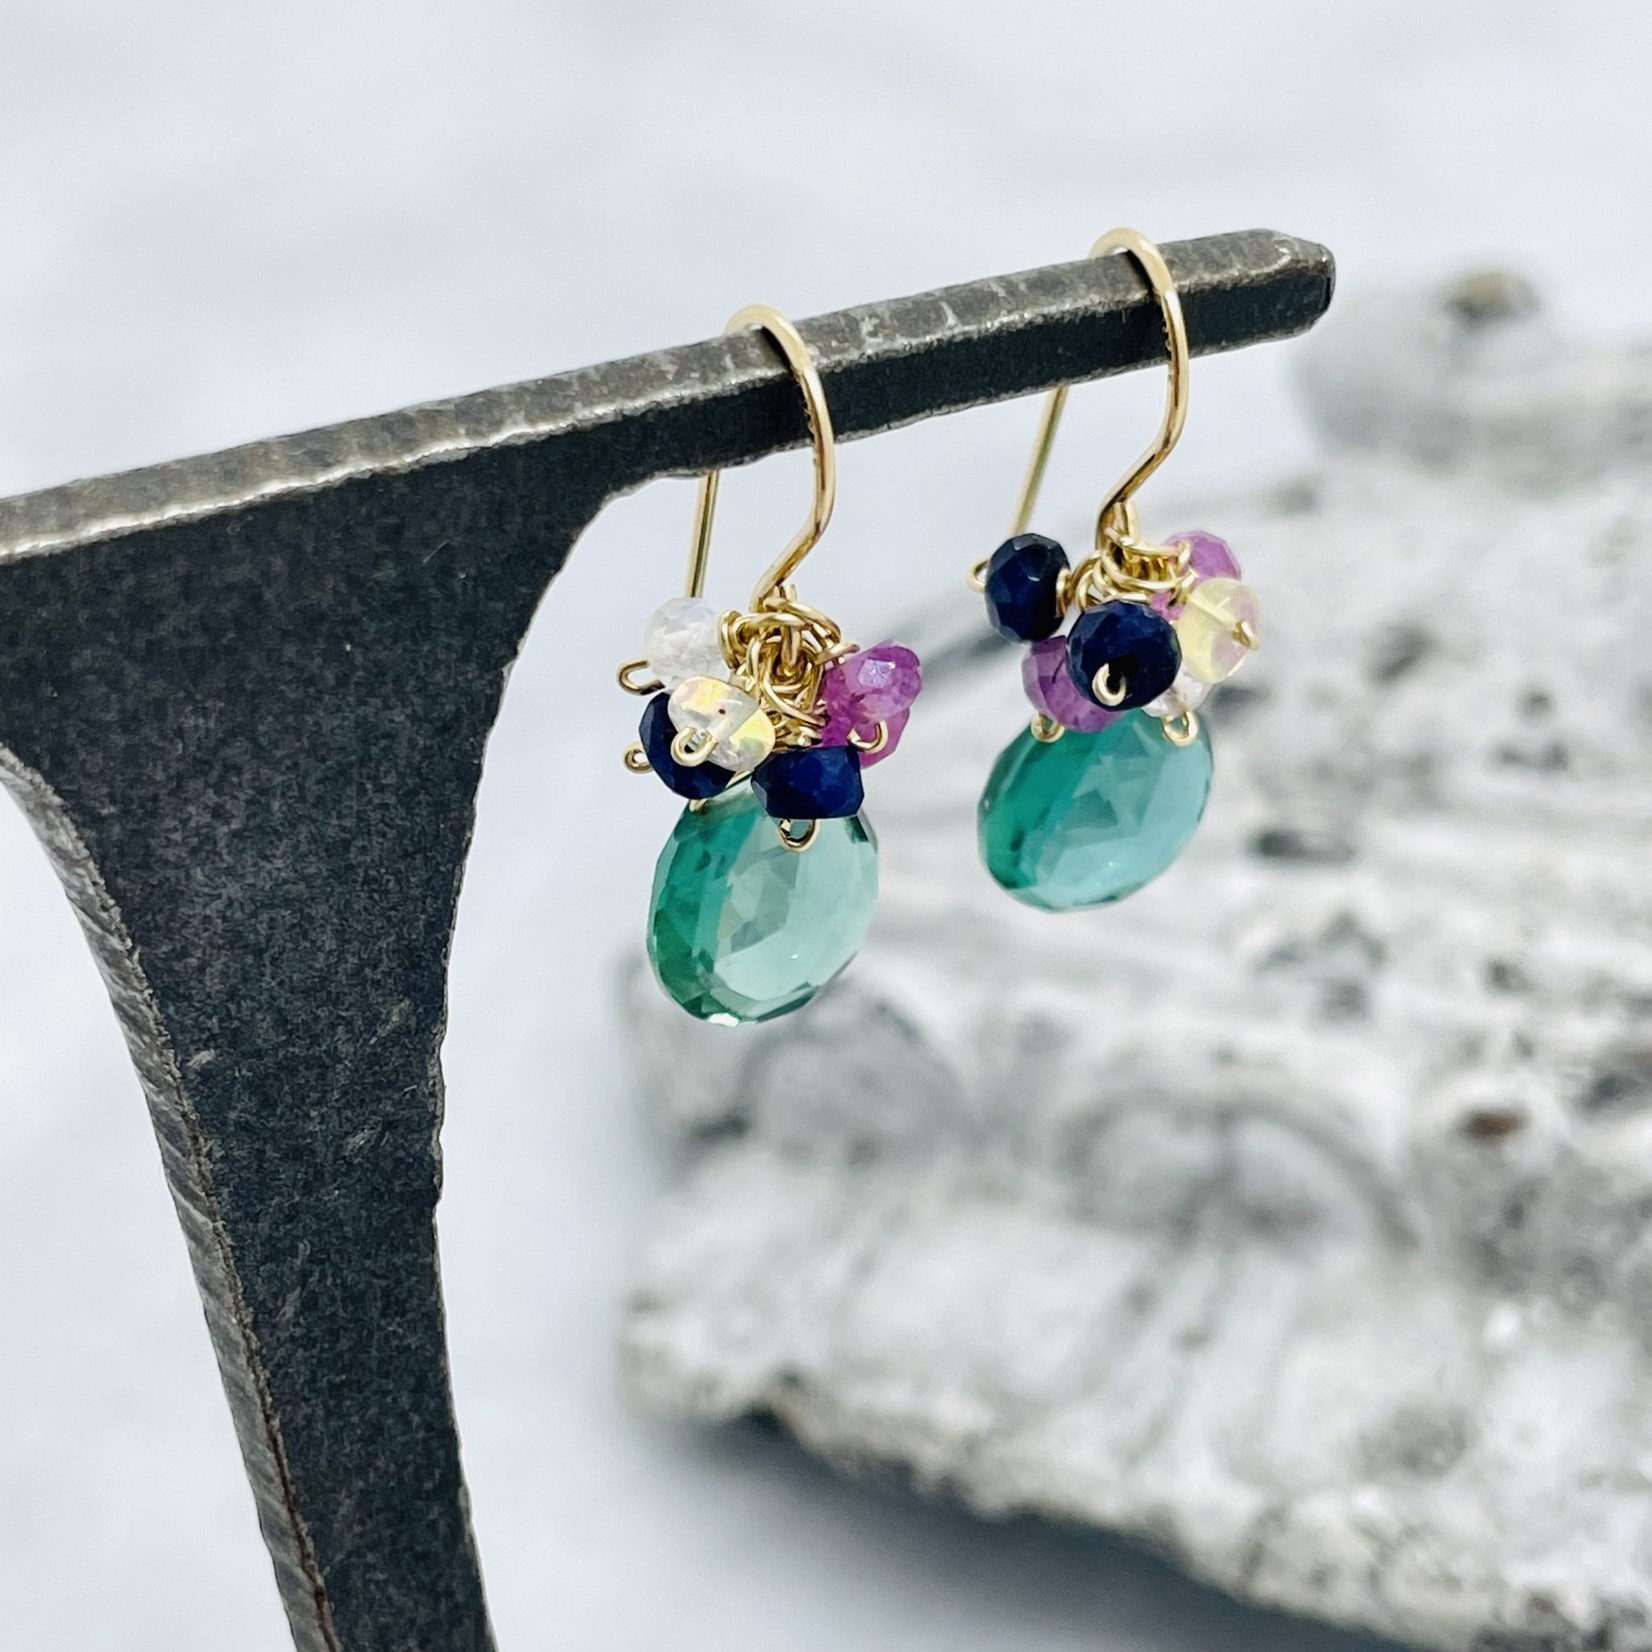 Judy Brandon Jewelry Handmade 14k Goldfill Earrings with Indicolite Quartz with Mixed Sapphire Rondelles